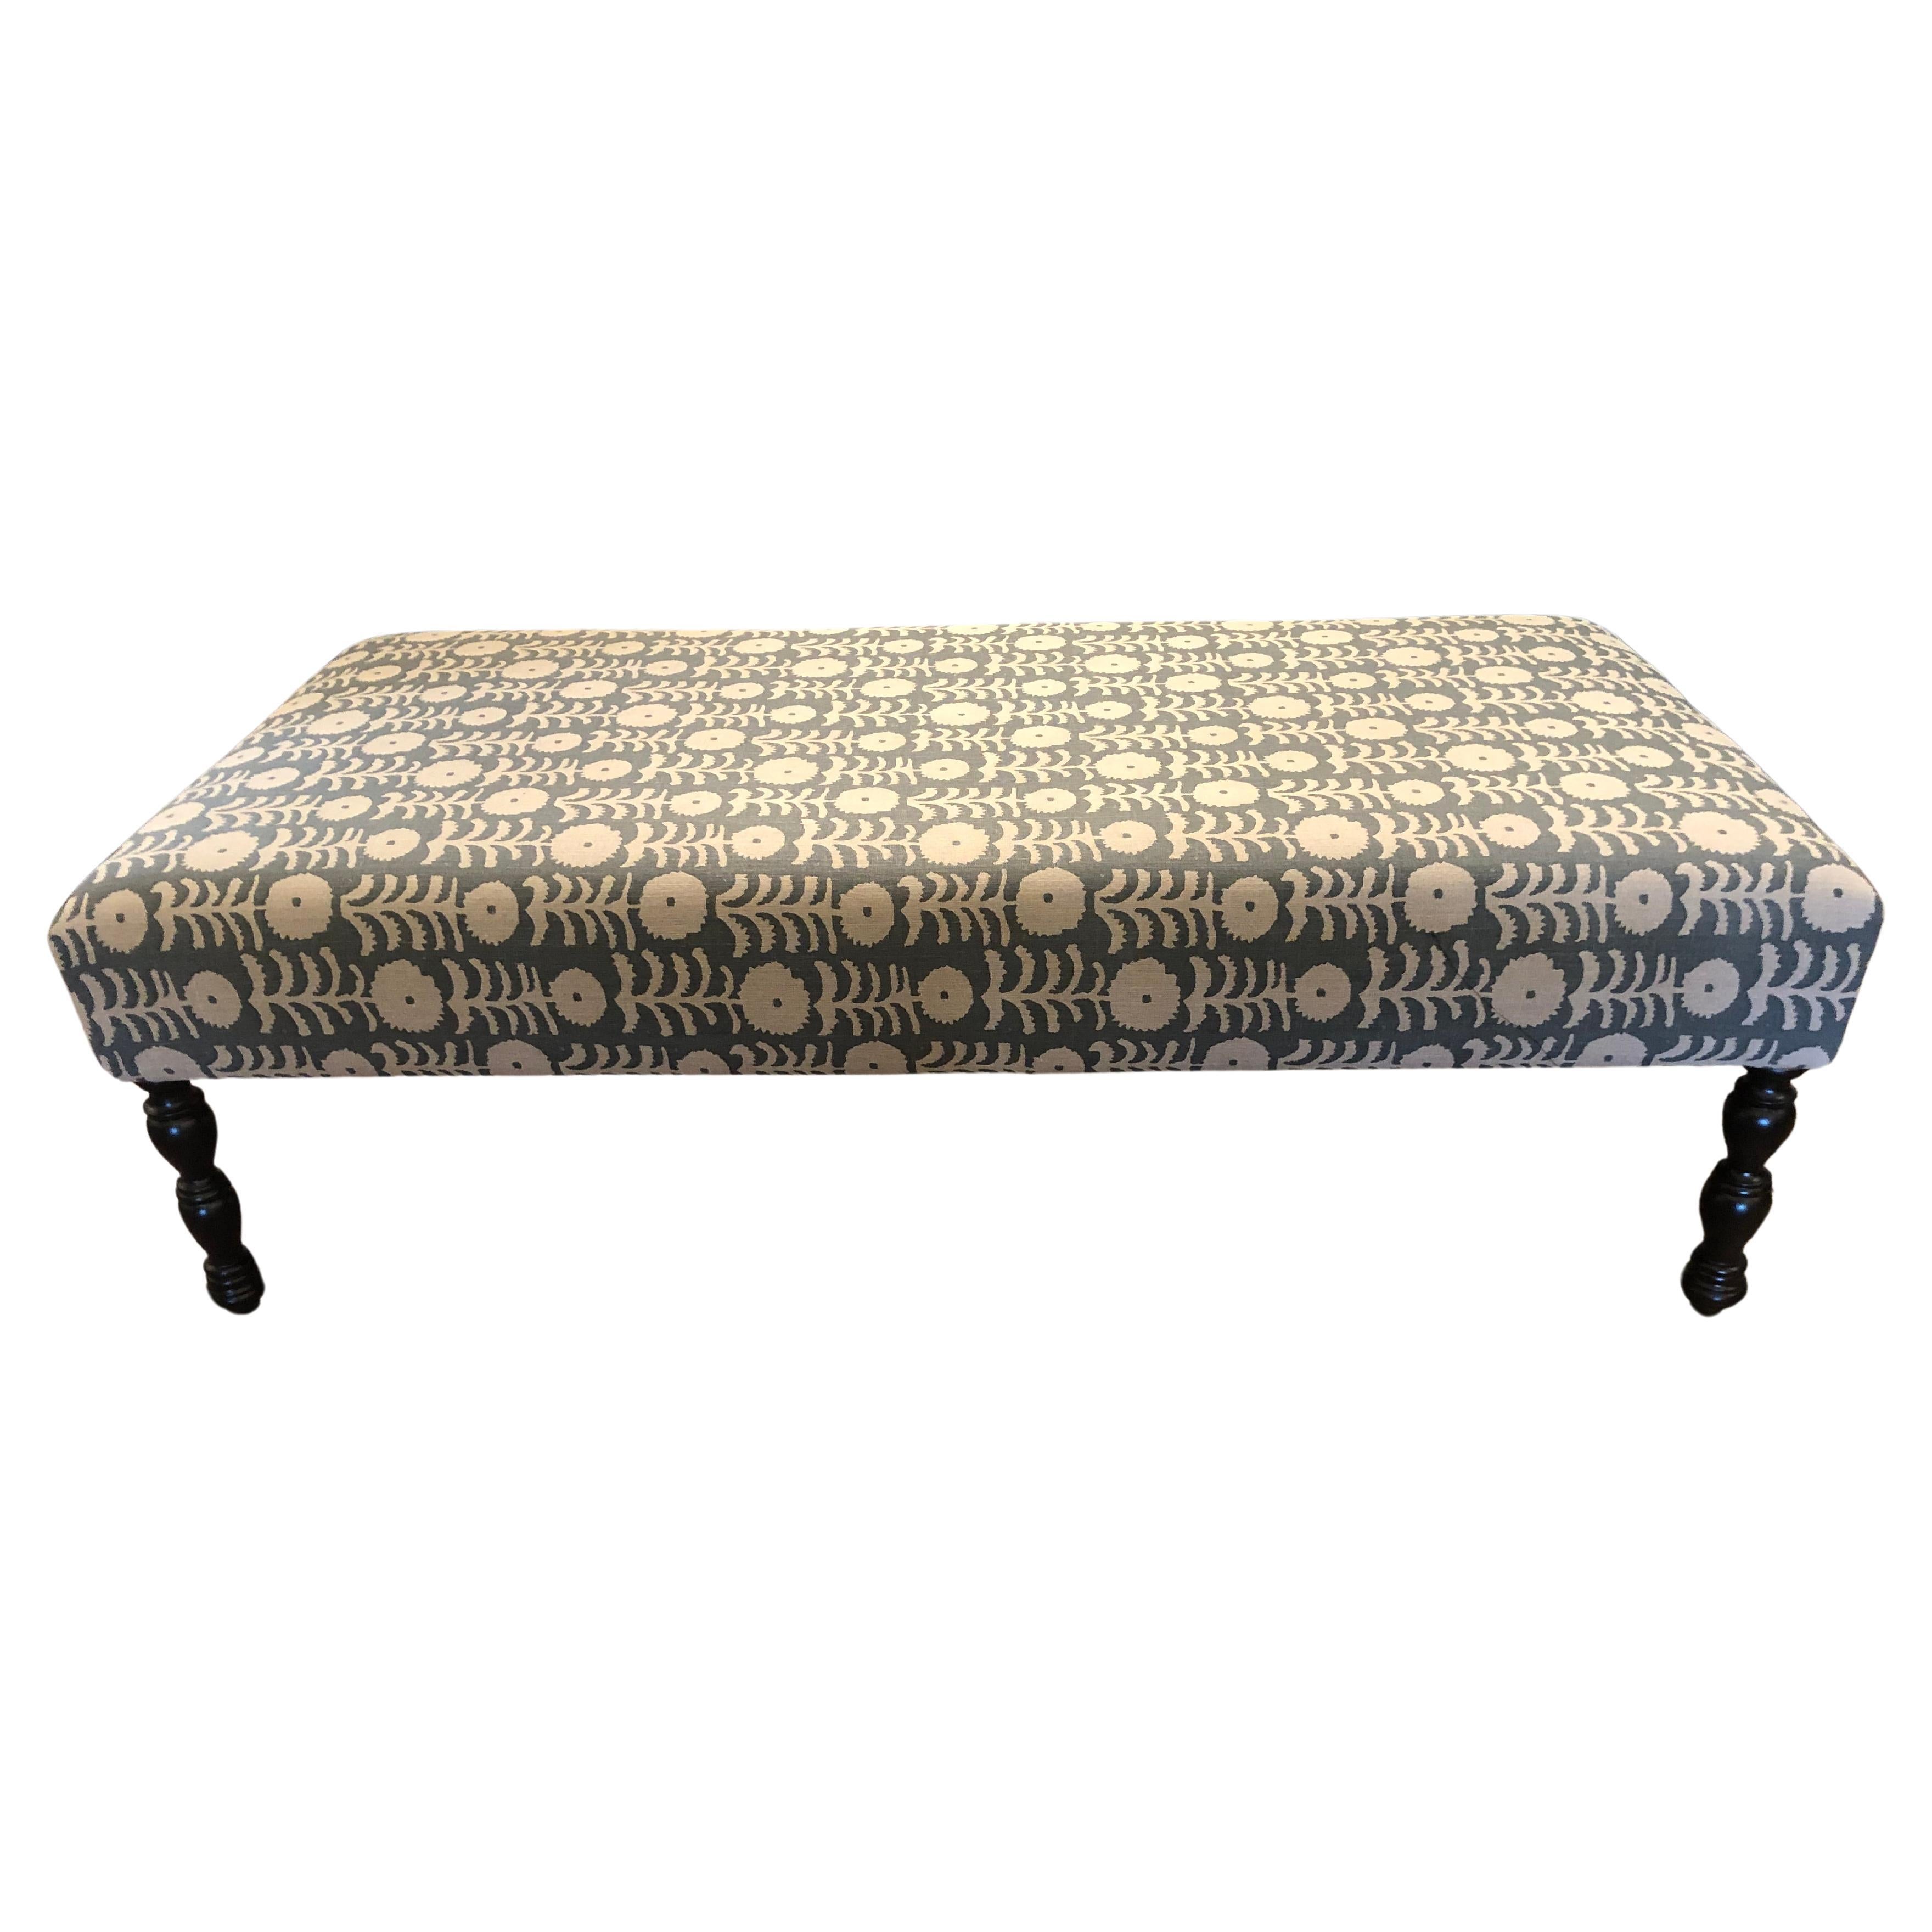 Very Large Charming Upholstered Ottoman Coffee Table